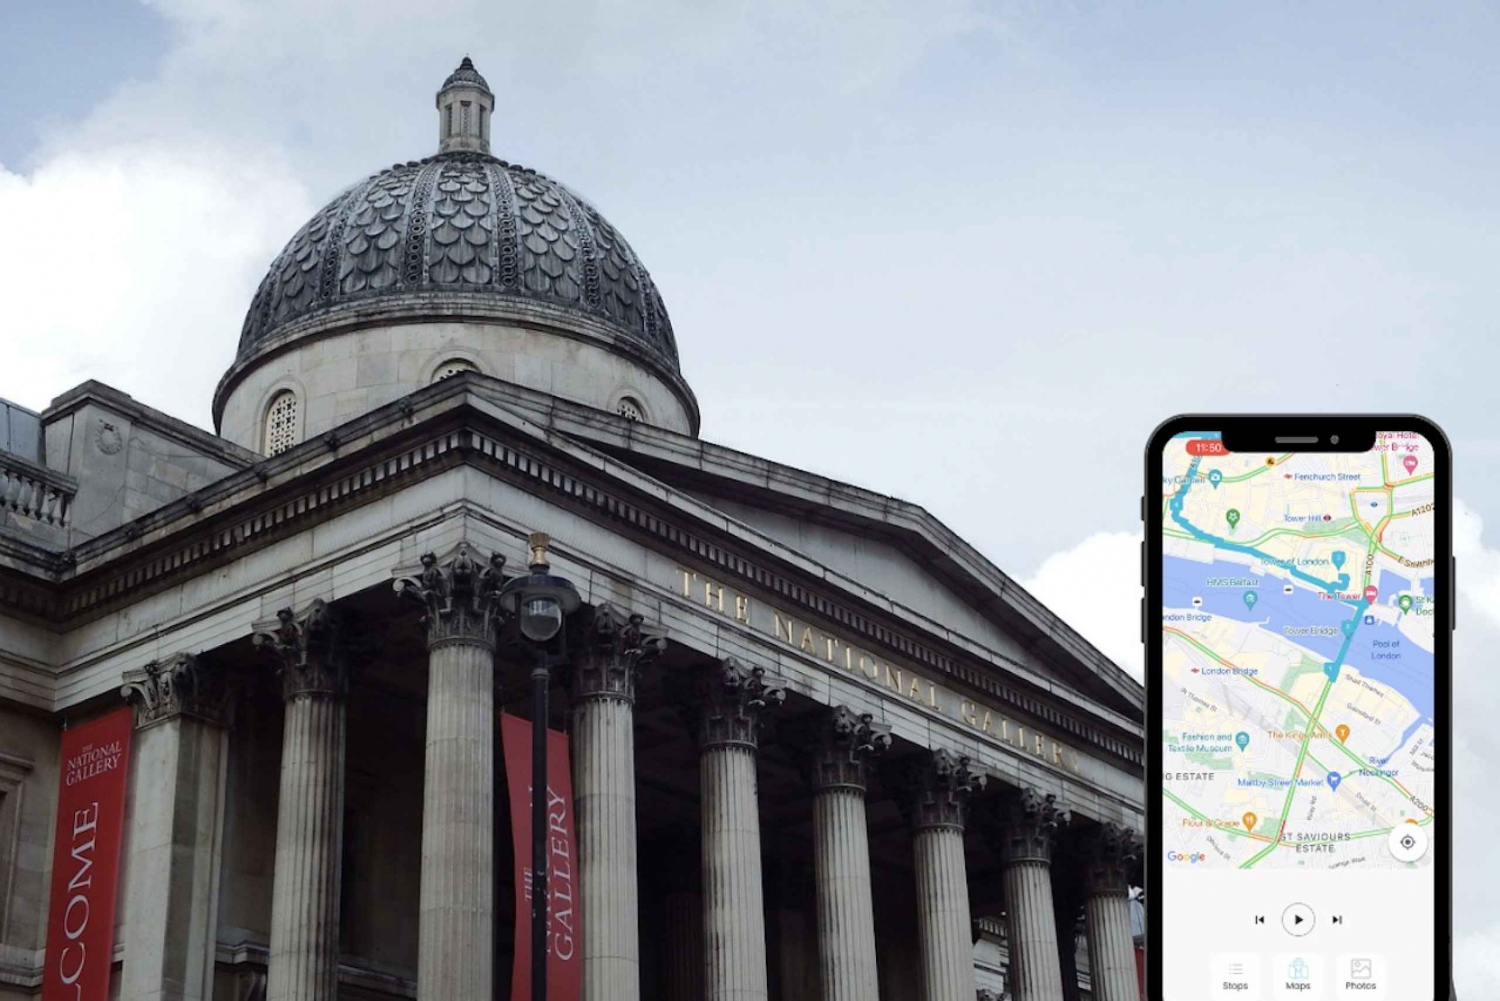 London: National Gallery tour in Chinese with smartphone app